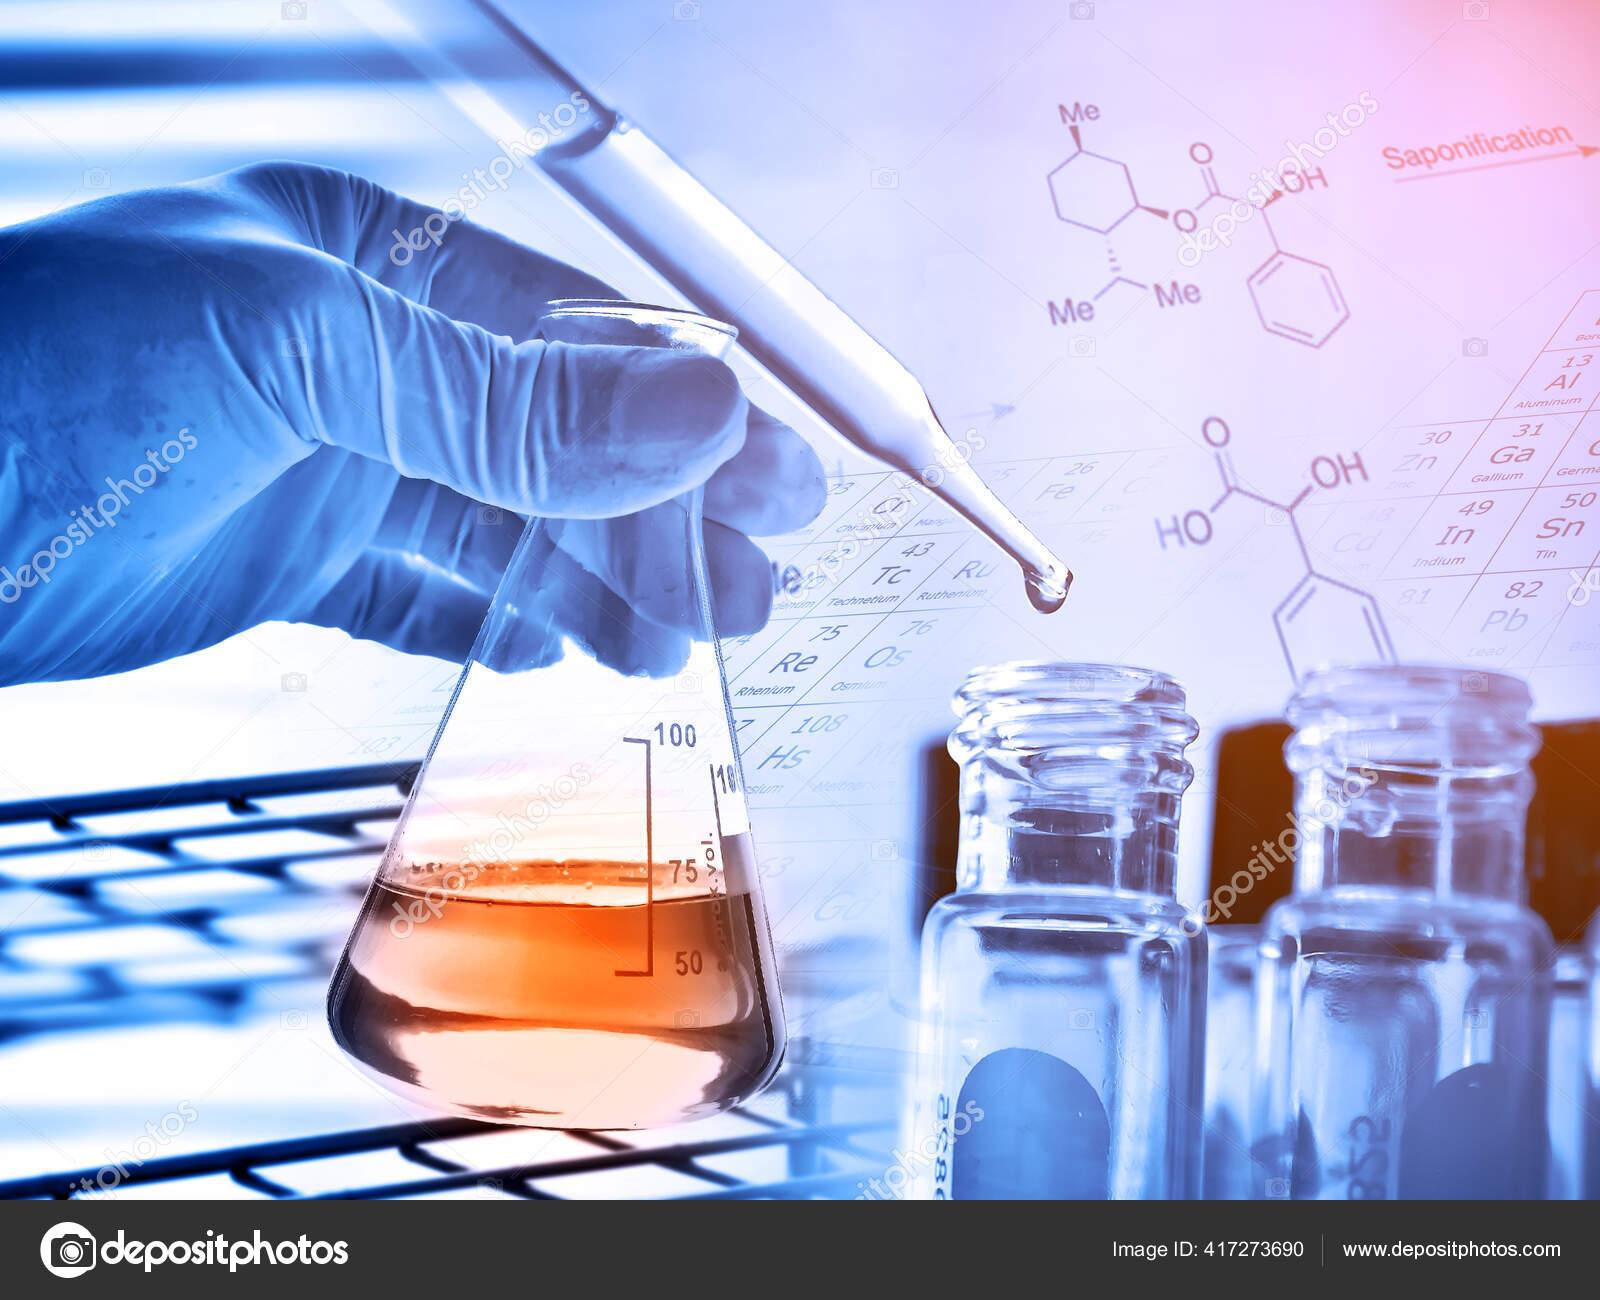 Hand Scientist Holding Flask Lab Glassware Chemical Laboratory Background  Science Stock Photo by ©totojang1977@ 417273690